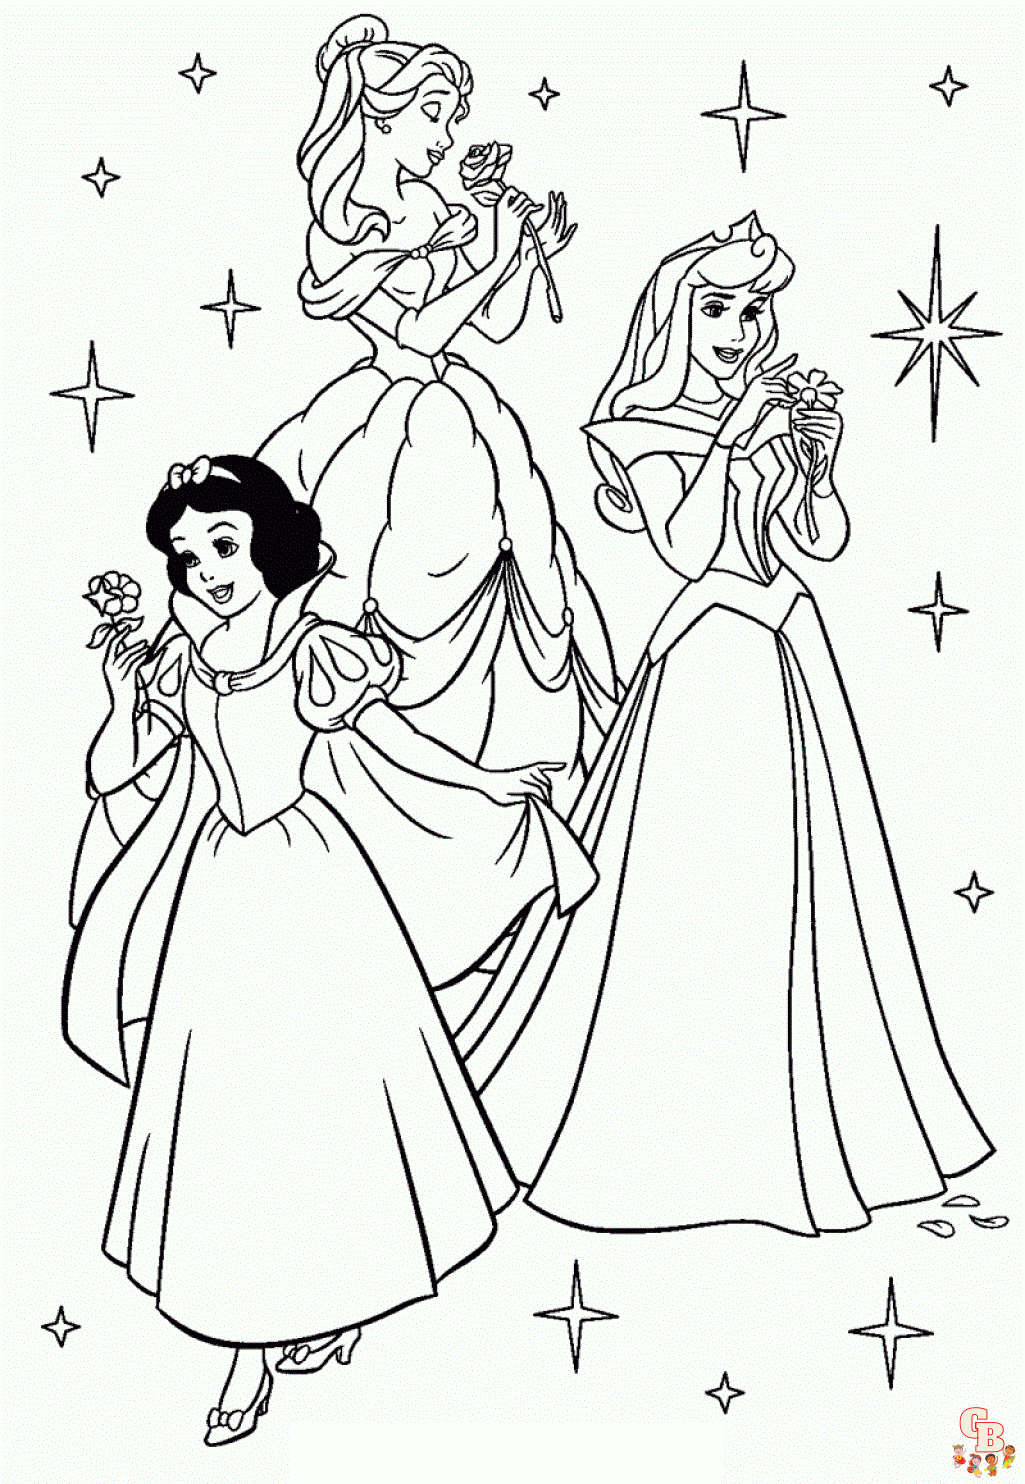 all disney princesses together coloring pages